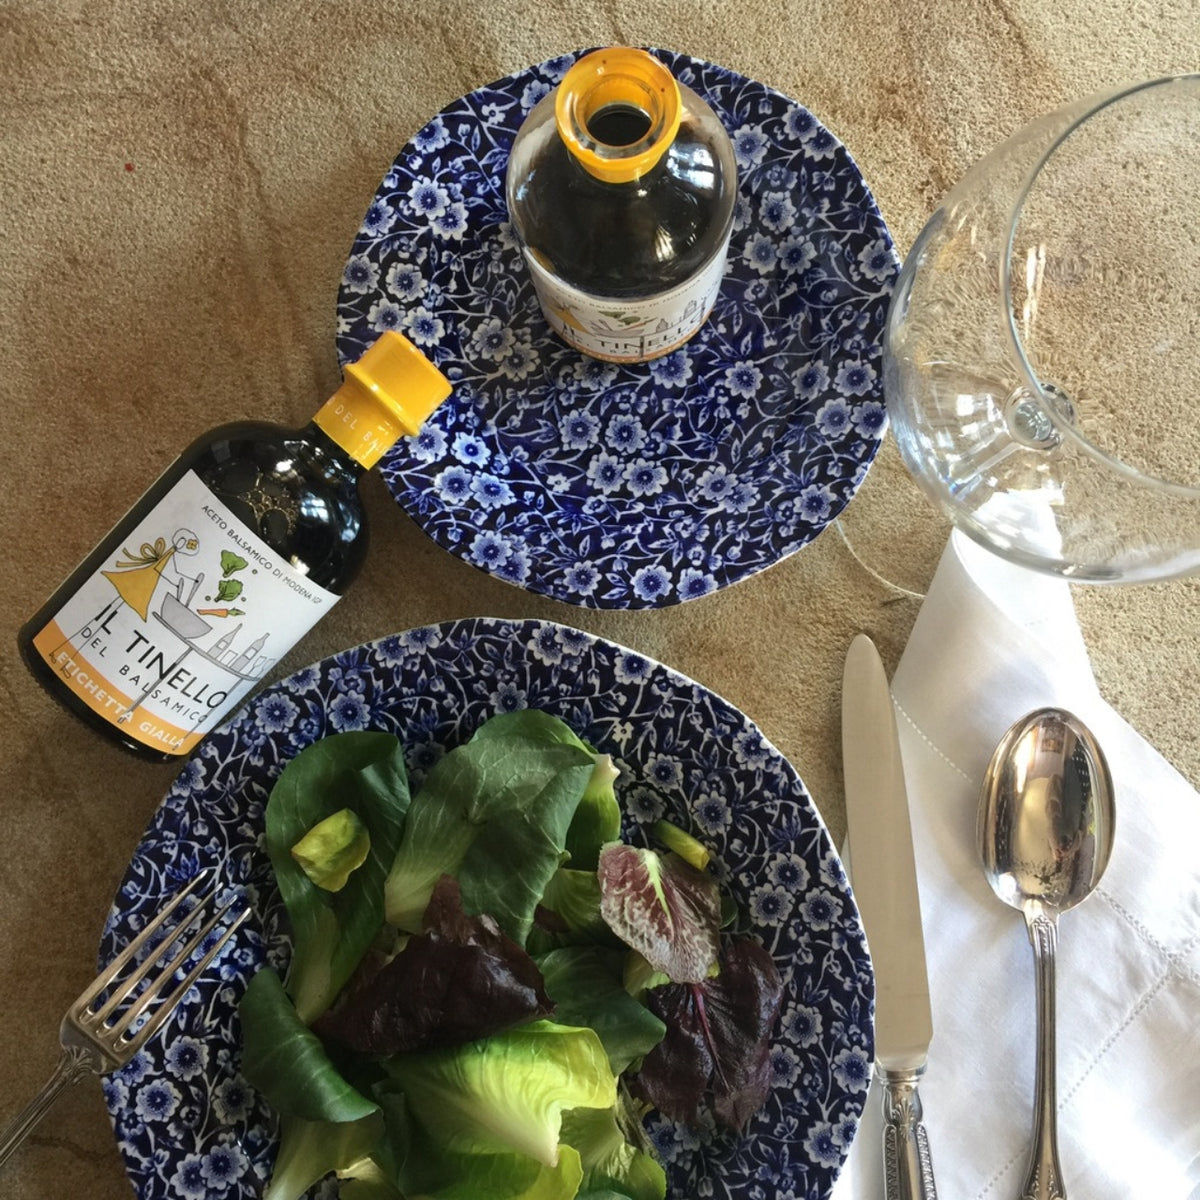 Il Tinello Balsamic Vinegar of Modena IGP Yellow Label High Acidity (without box) 250ml Imported and distributed in the UK by Just Gourmet Foods